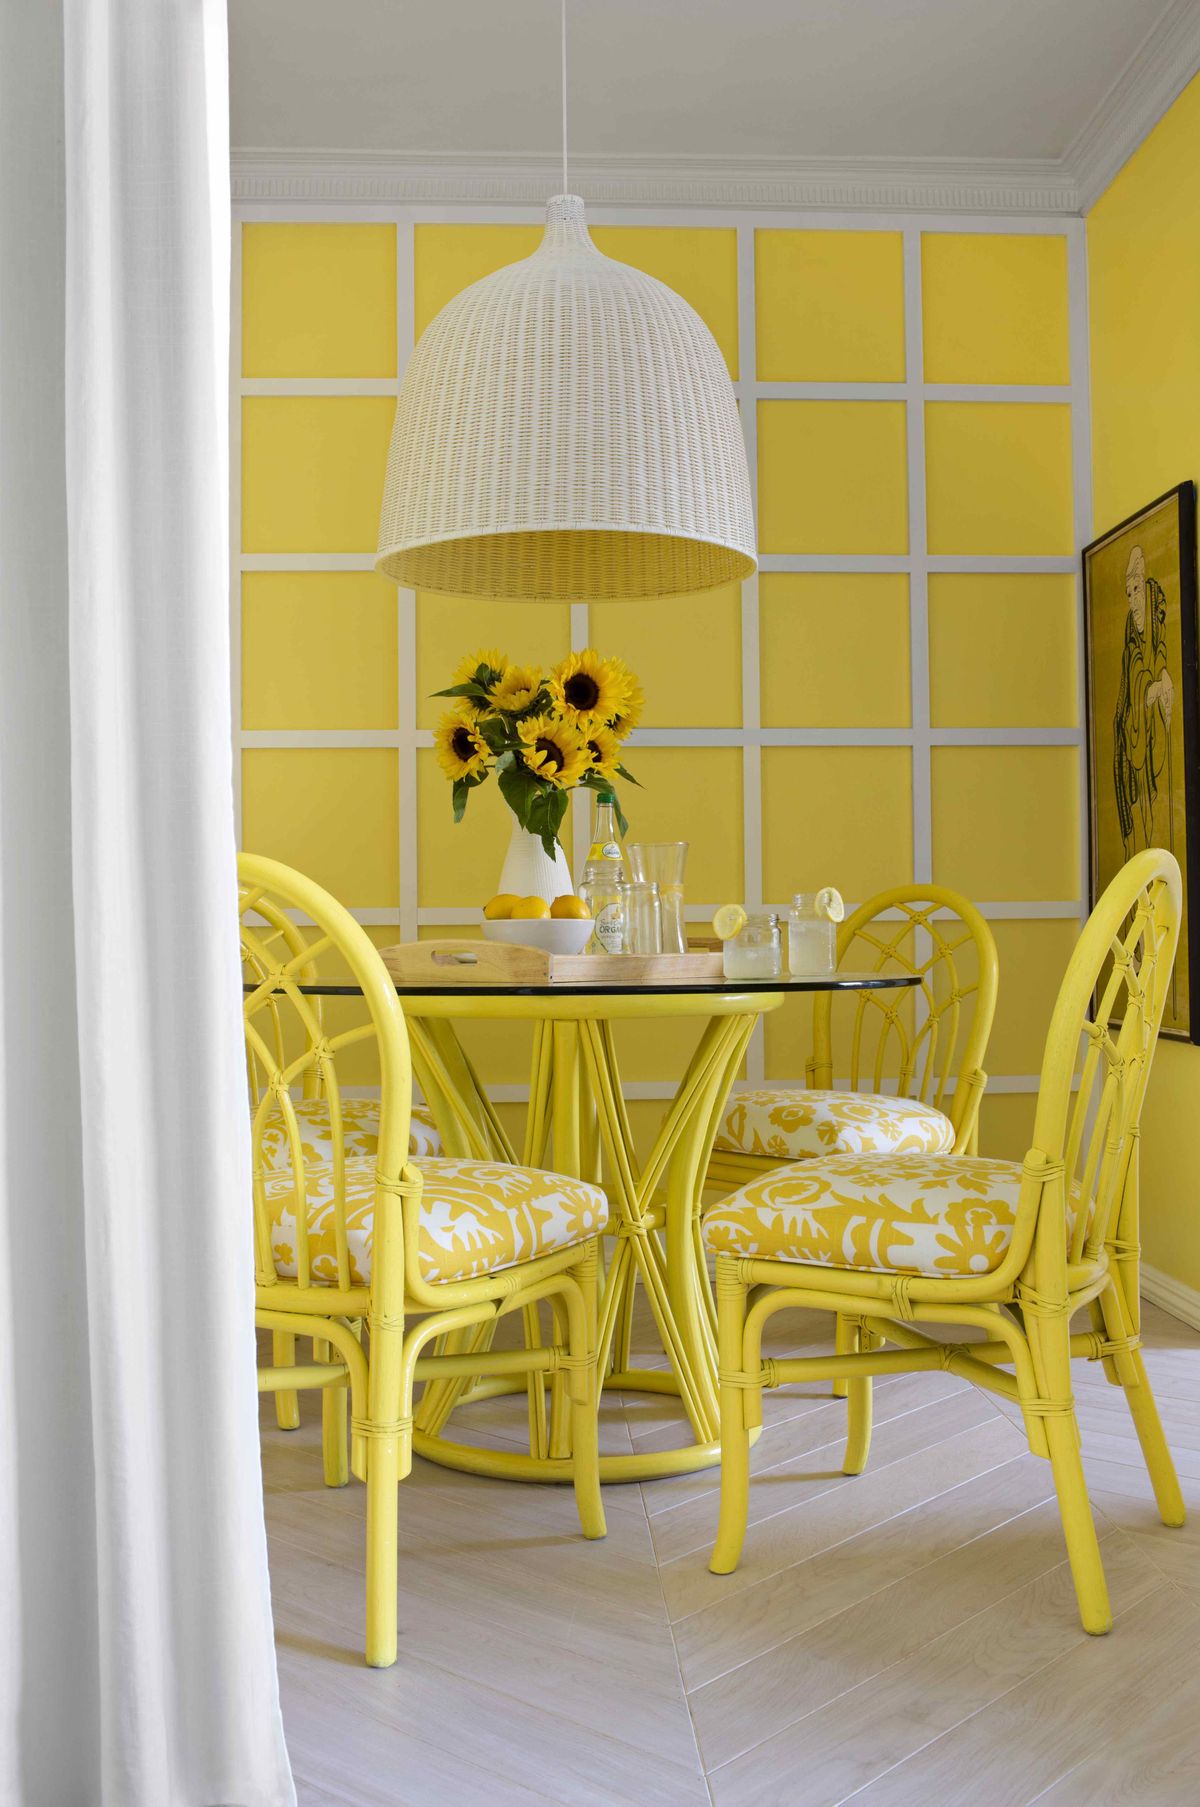 An Australian photographer’s love of warm, golden yellow sun from his home country inspired designer Brian Patrick Flynn to cover the entire space in bright yellow tones in his client’s dining room in Los Angeles.